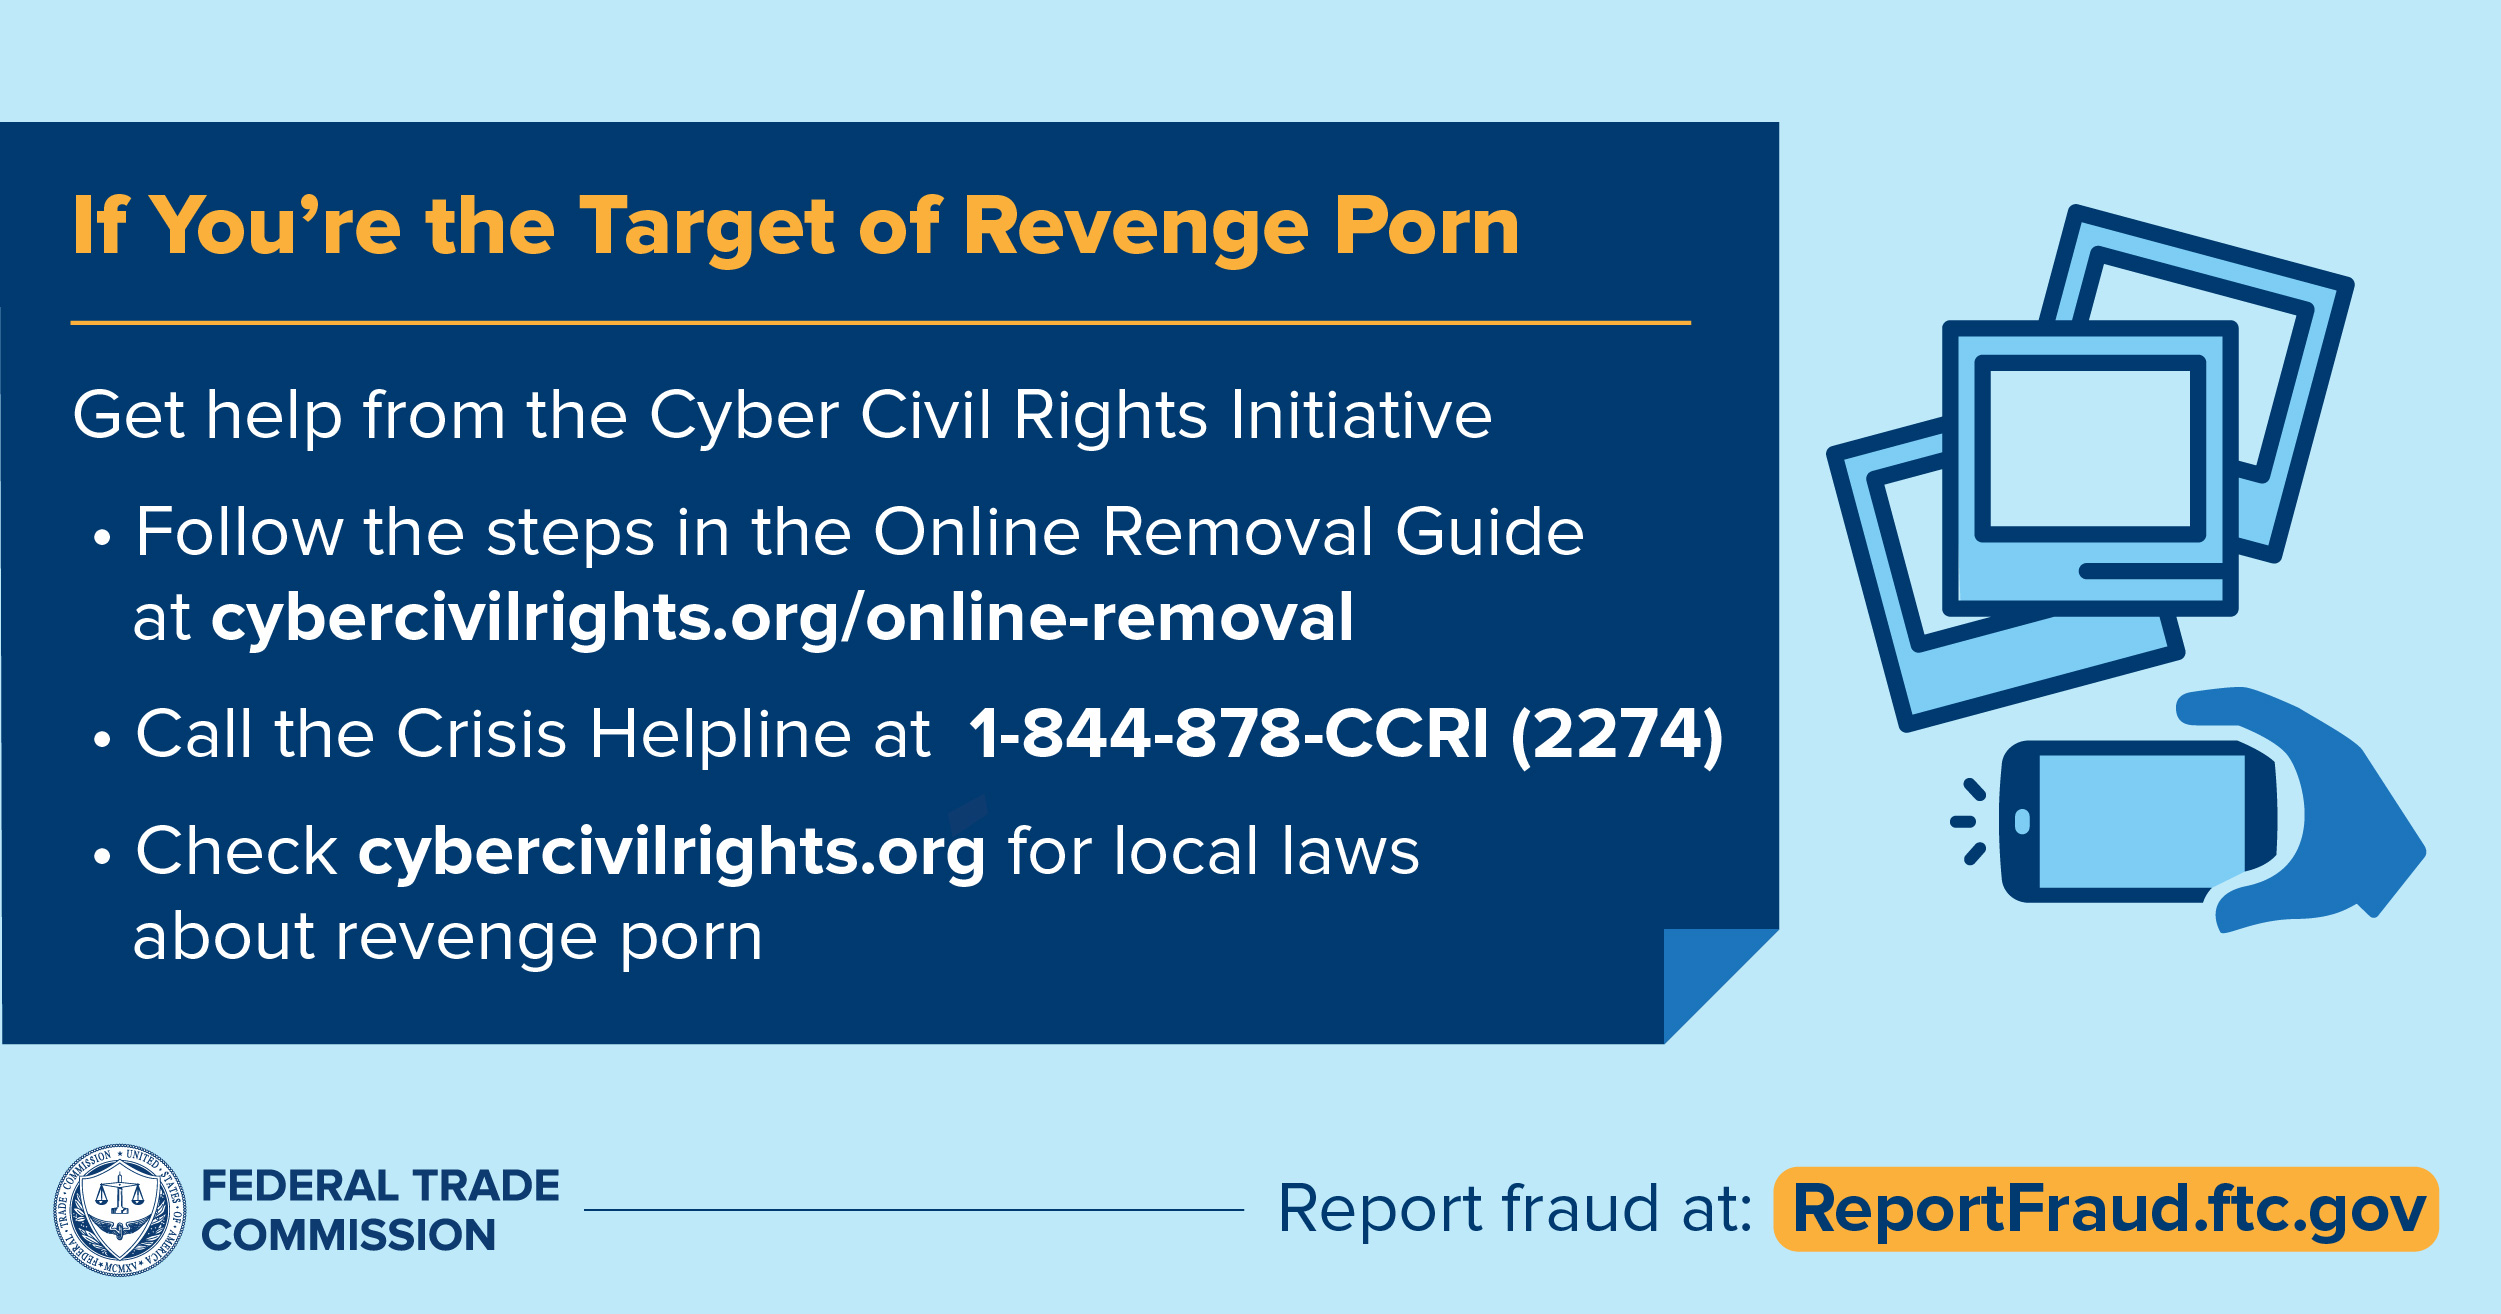 Revenge Porn Taking - What To Do if You're the Target of Revenge Porn | Consumer Advice